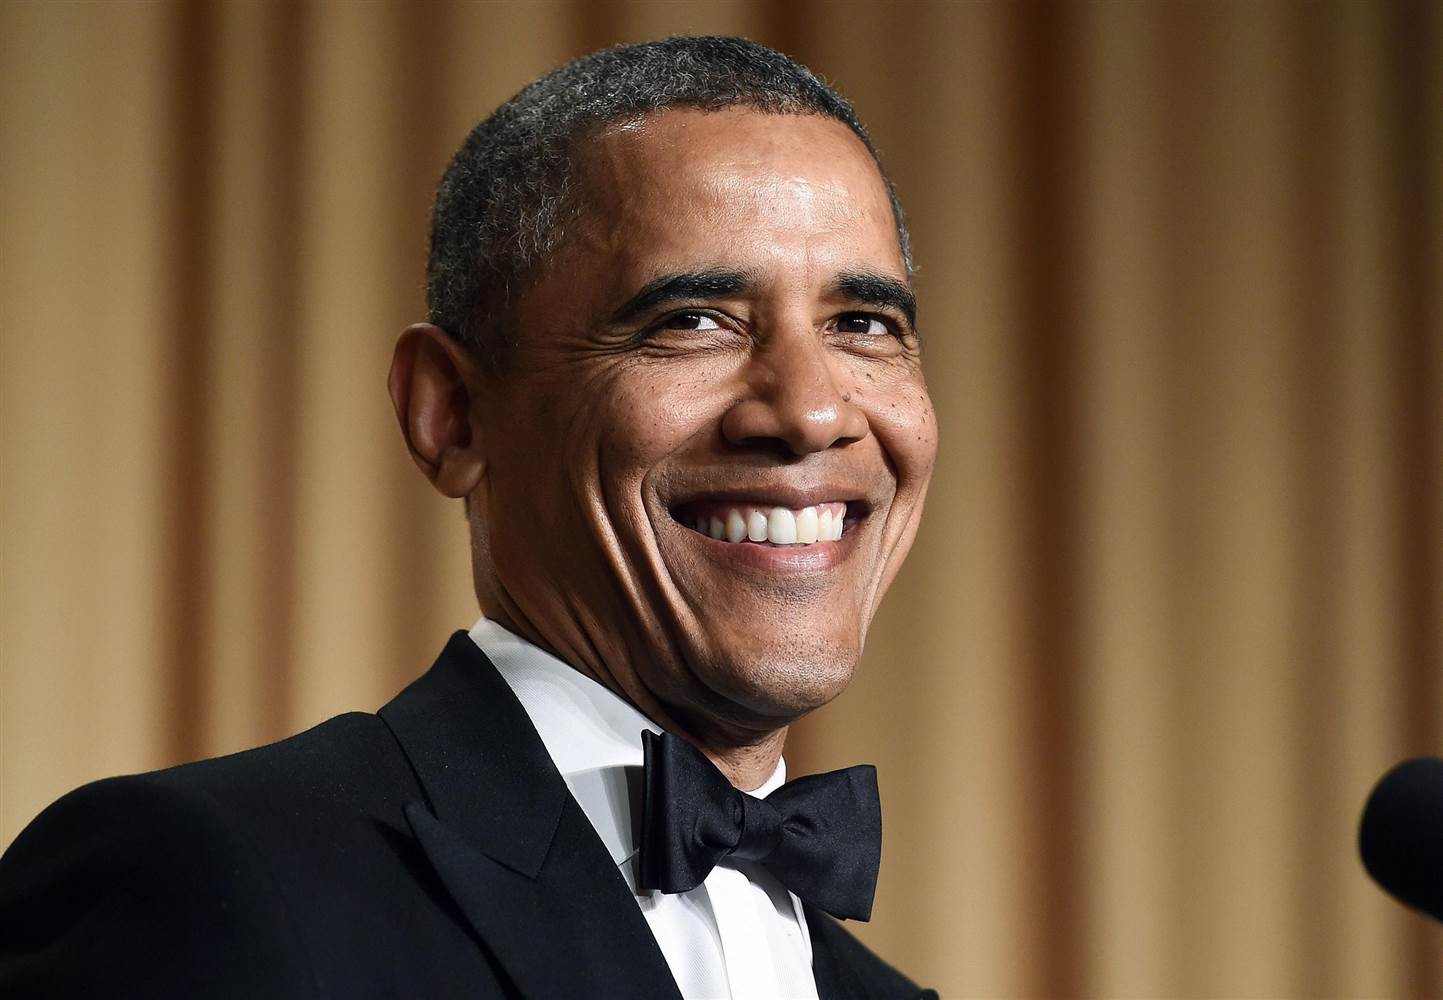 Obama’s “Hometown” Playlist Includes JC Brooks, Chance The Rapper, Tom Waits and More